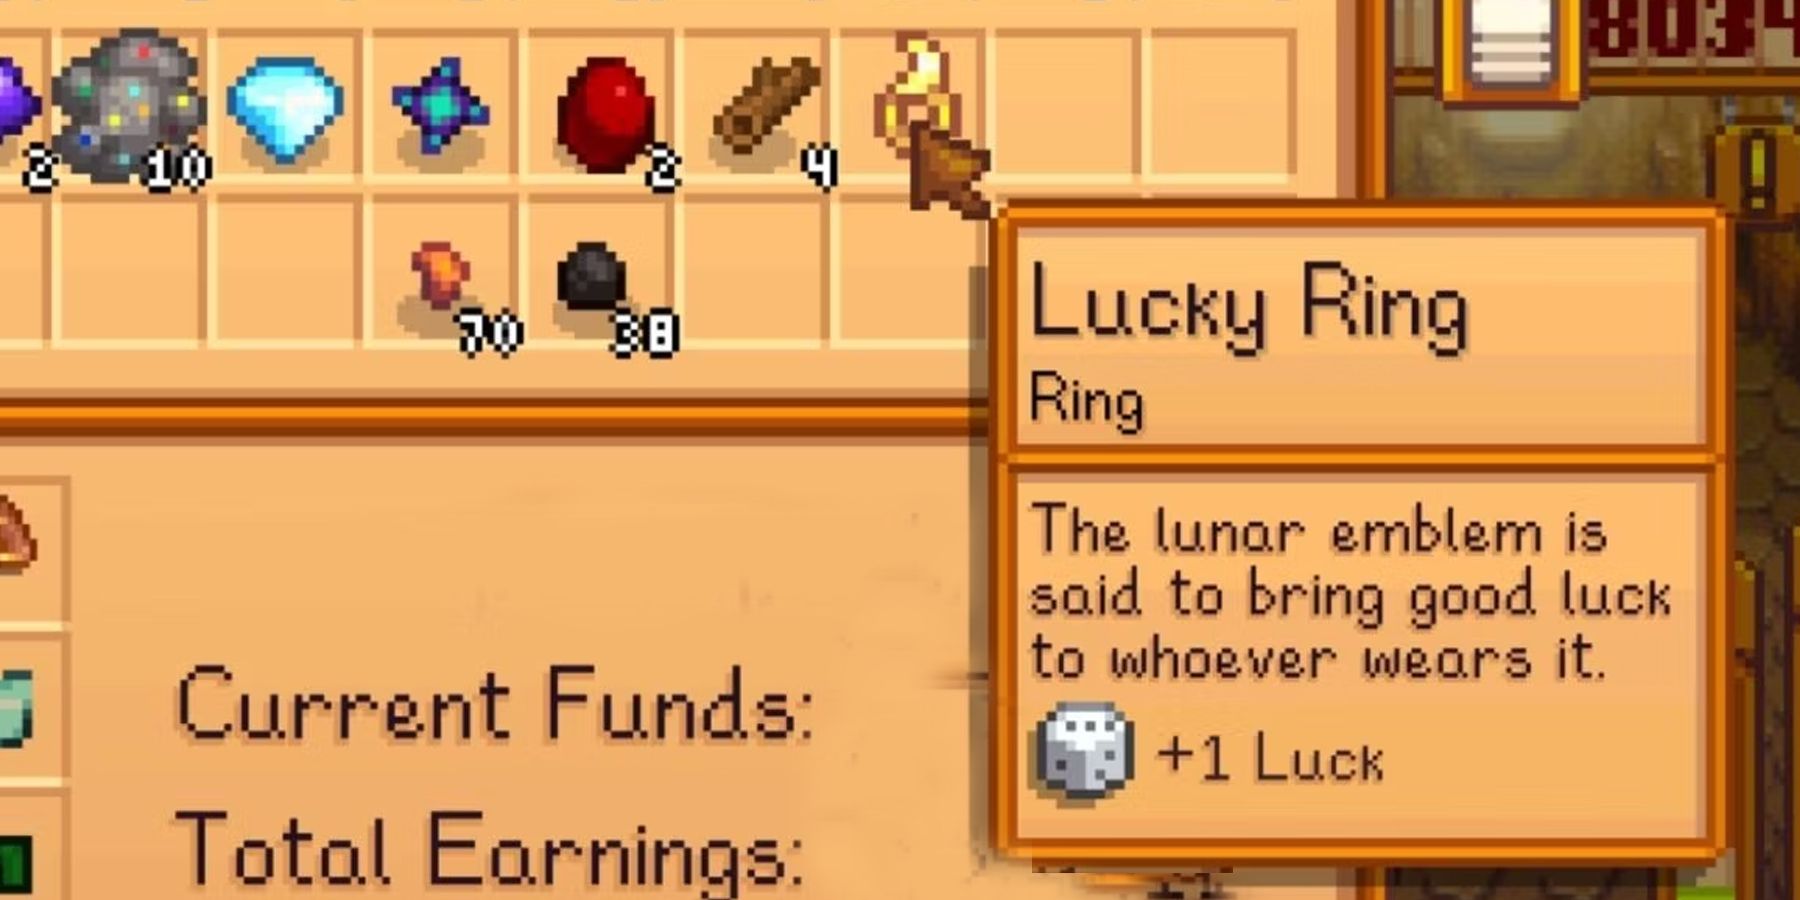 Lucky Ring increases Luck in Stardew Valley